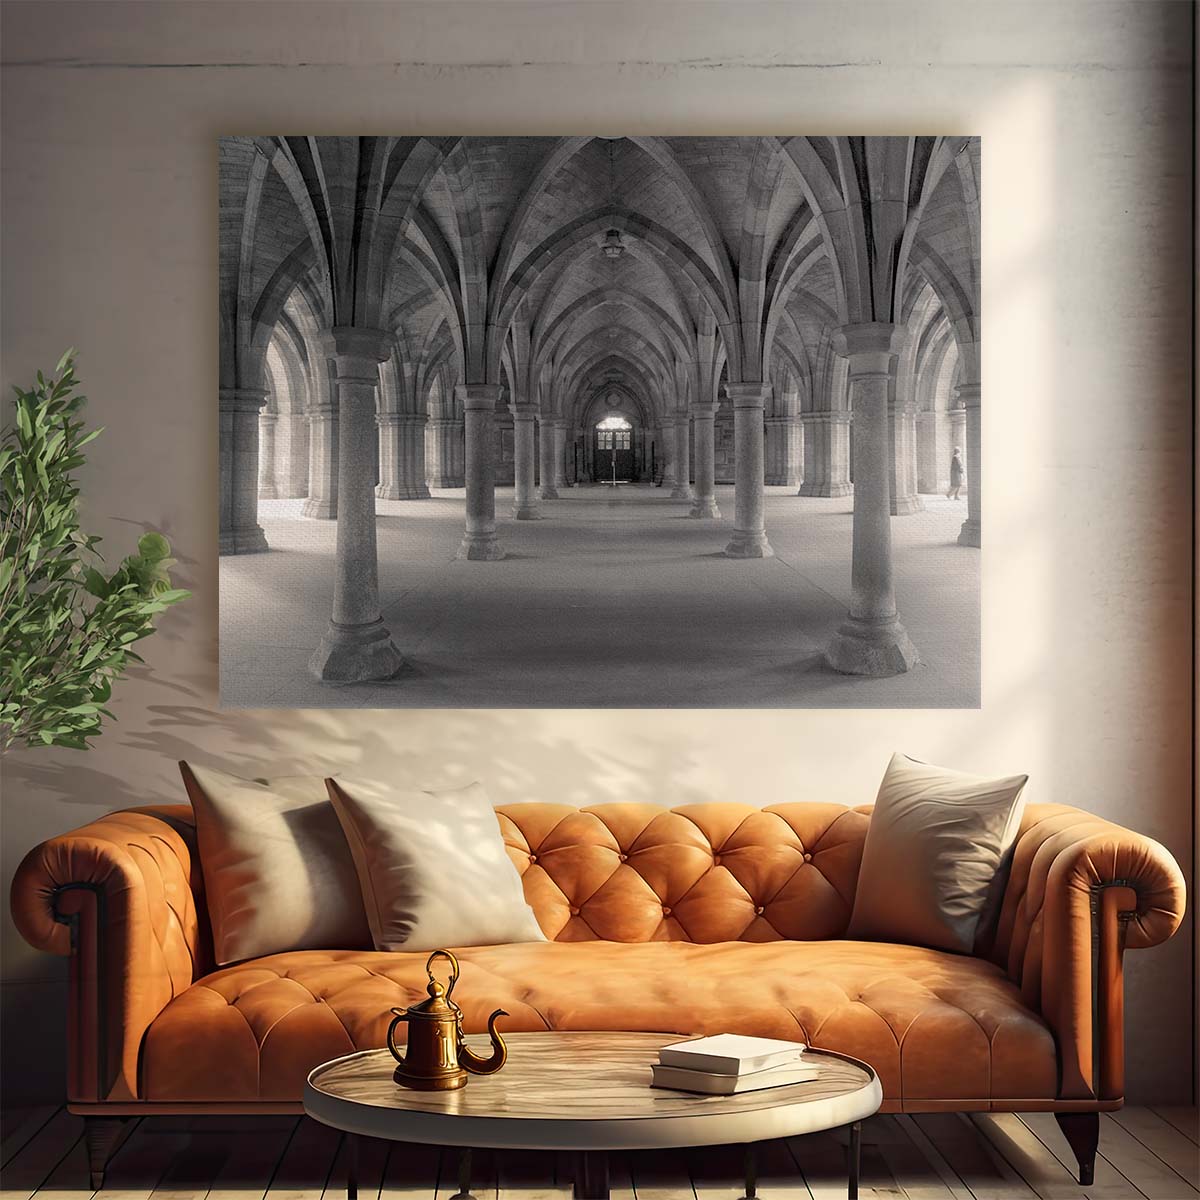 Glasgow University Historic Architecture Panorama Wall Art by Luxuriance Designs. Made in USA.